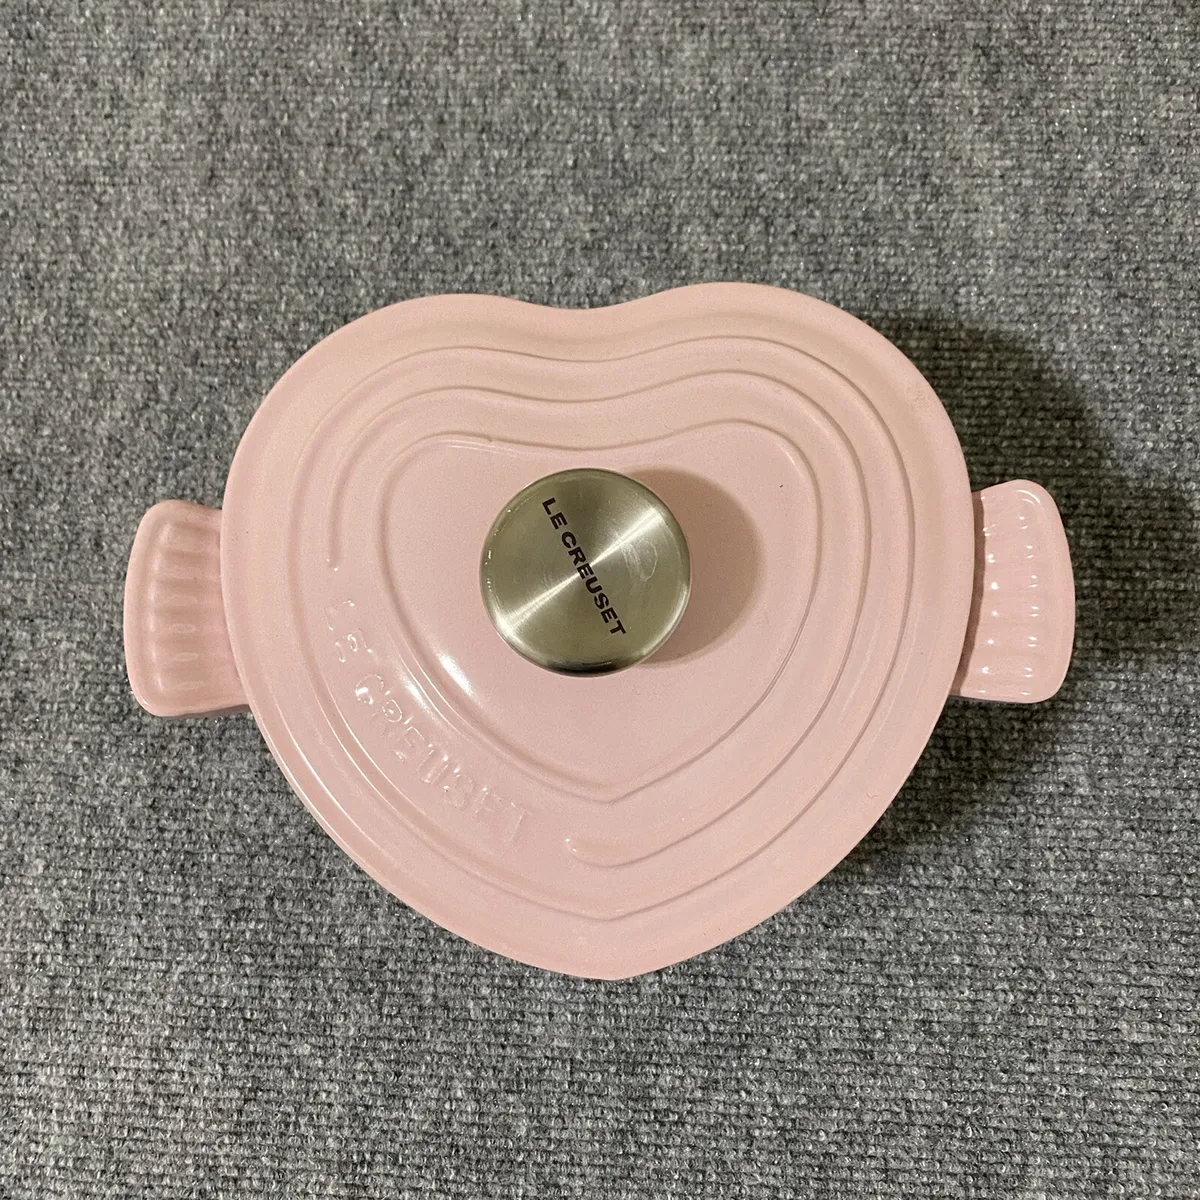 Le Creuset Dutch Oven Iron Pink Heart Day | eBay